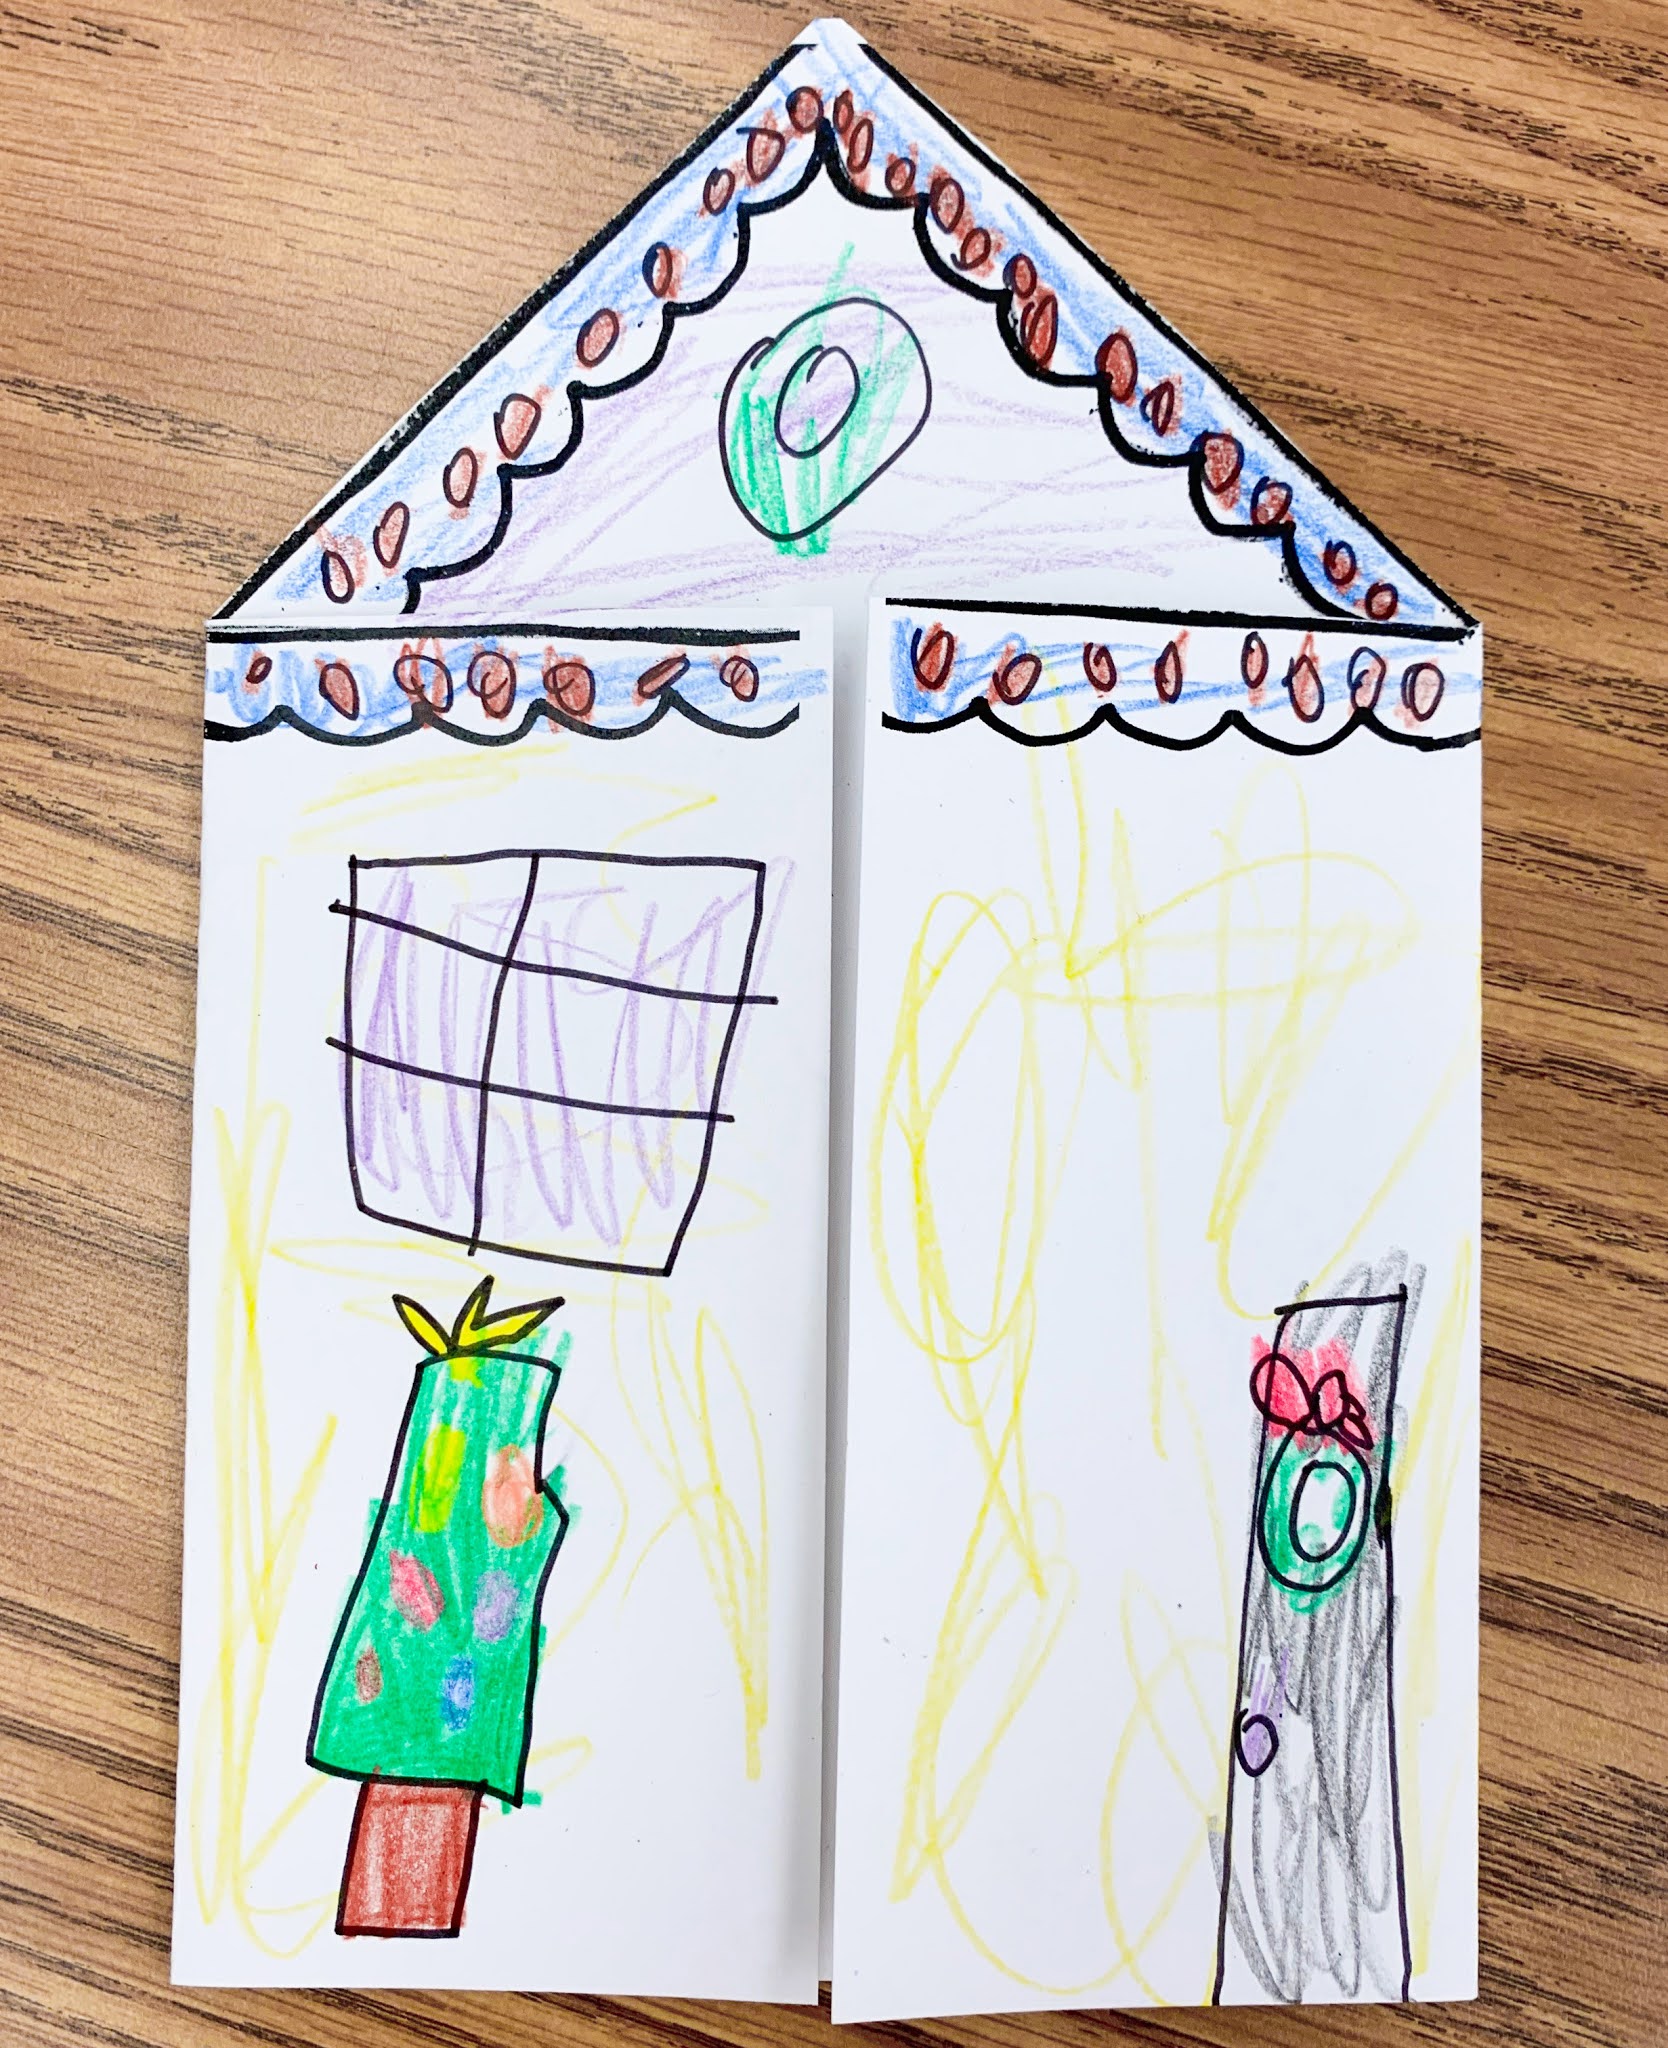 A Gingerbread House Card, A Paper Plate Angel, and The Gingerbread Man Play!